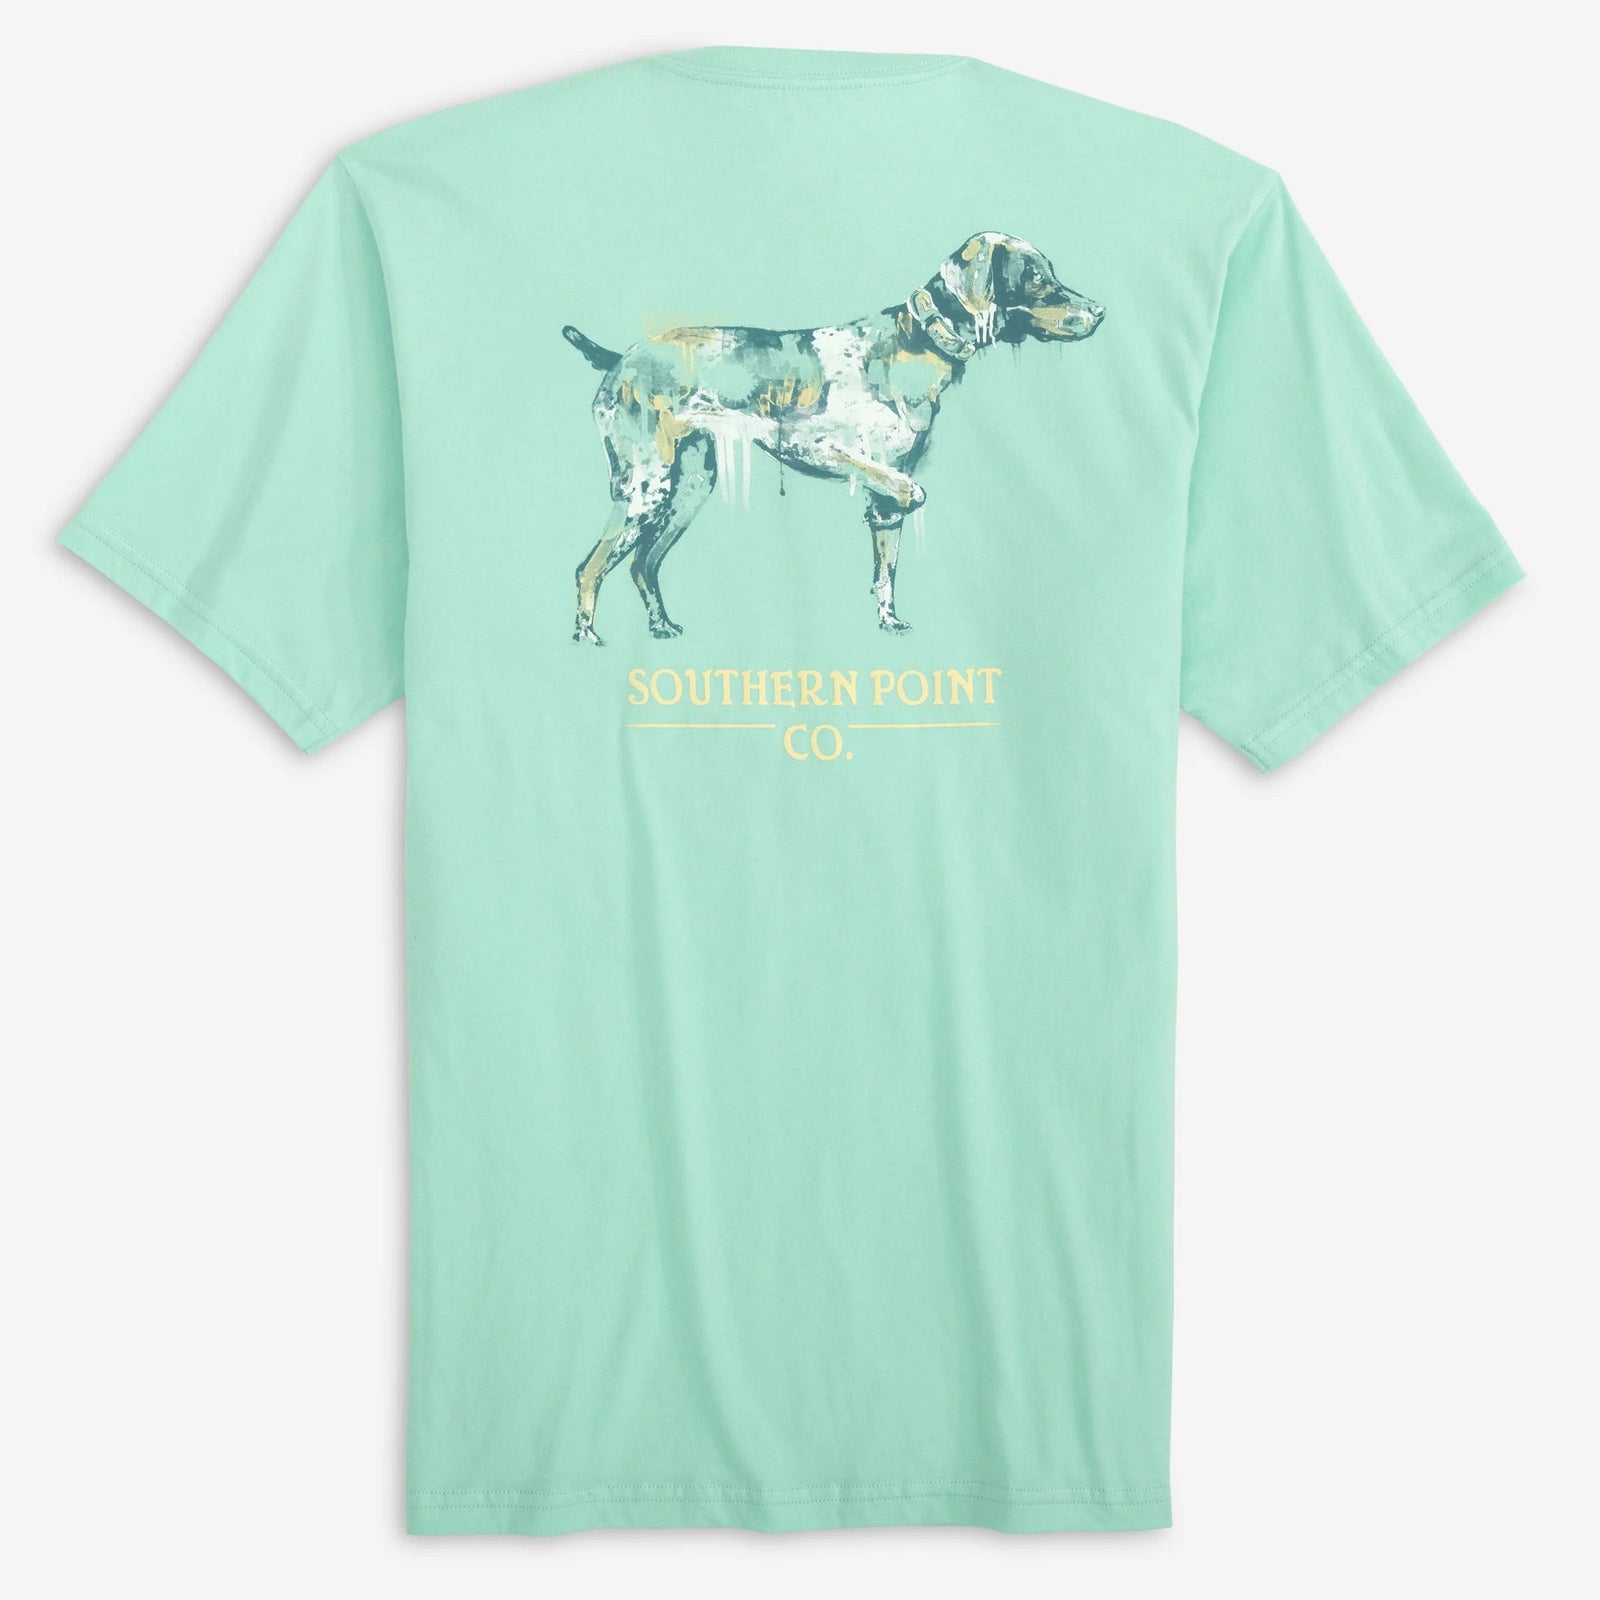 Trademark Tee – Southern Point Co.